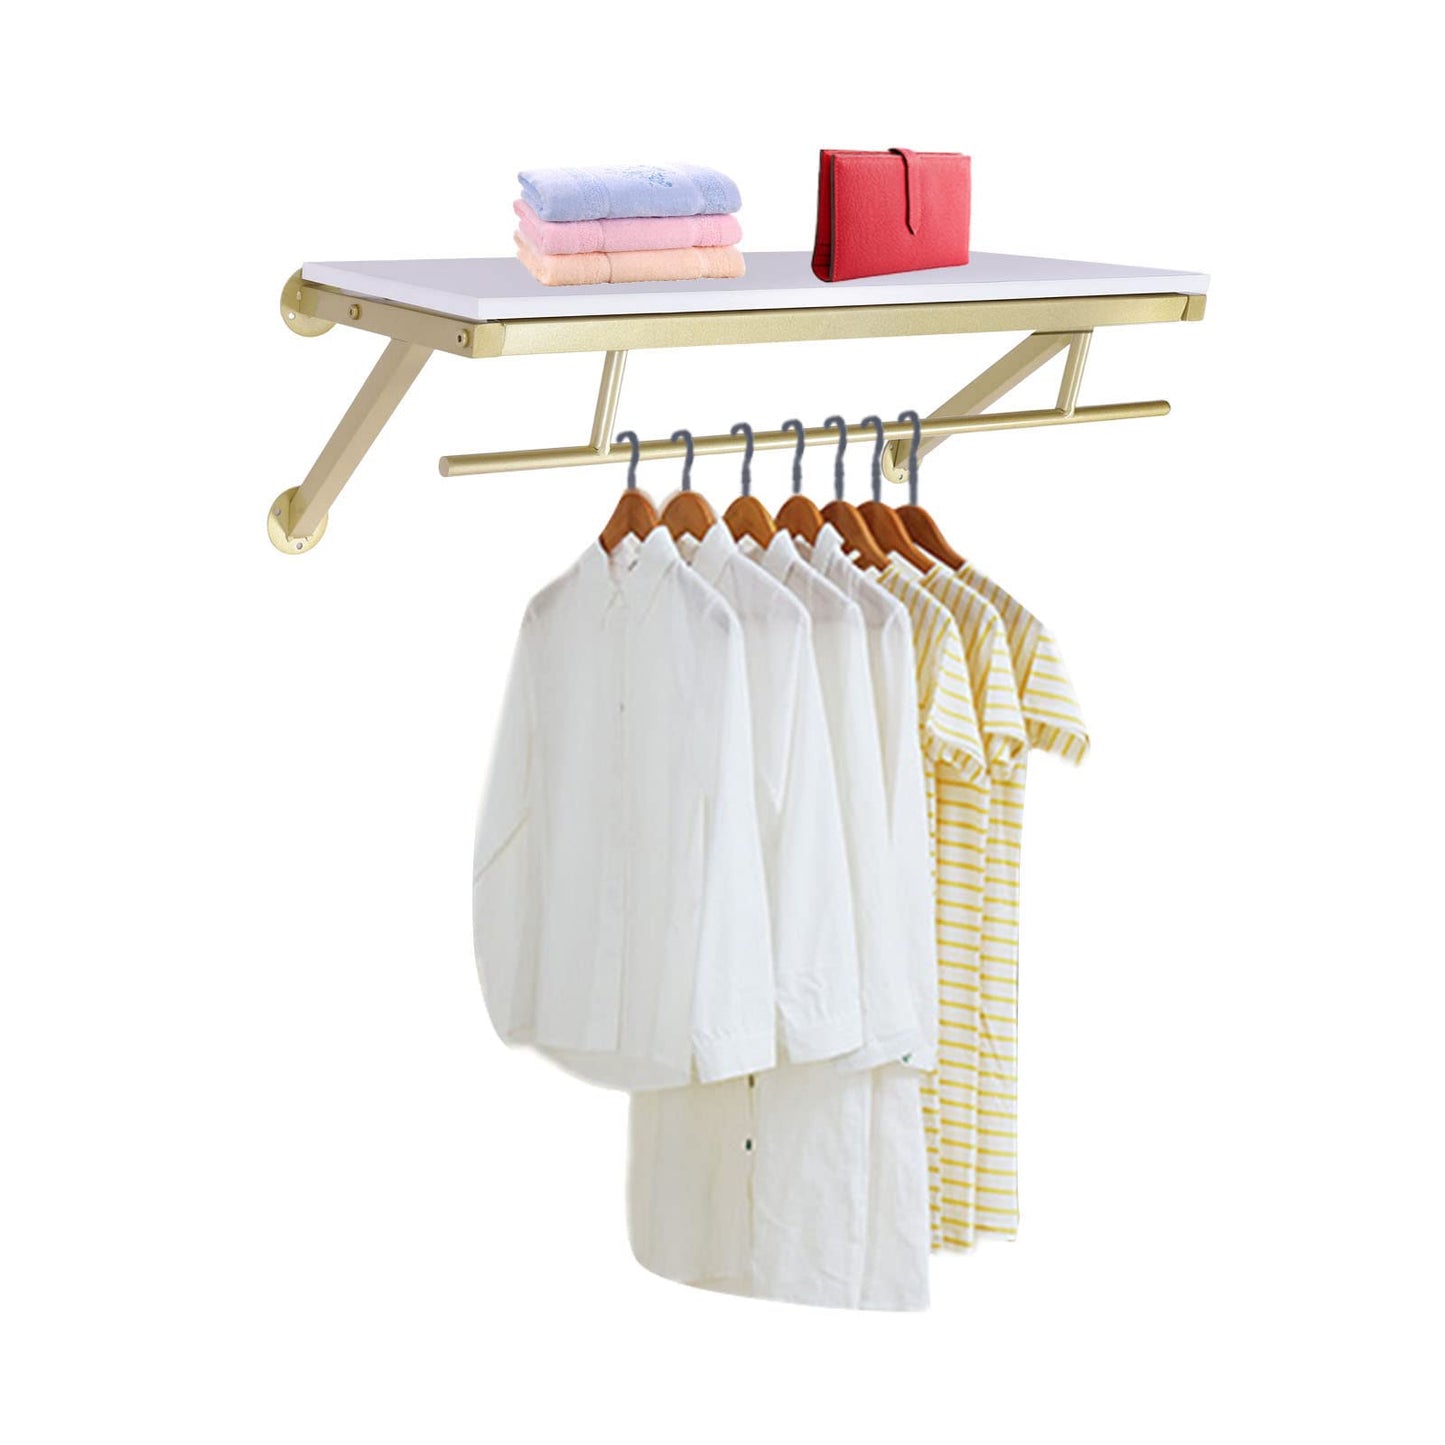 Clothes Rack with Top Shelf, Wall Mounted Clothes Rack Detachable Multi-Purpose Hanging Rod Heavy Duty Pipe Clothing Rack for Bedroom, Clothing Store, 31.49 * 11.81inch Brand: SHATUOA